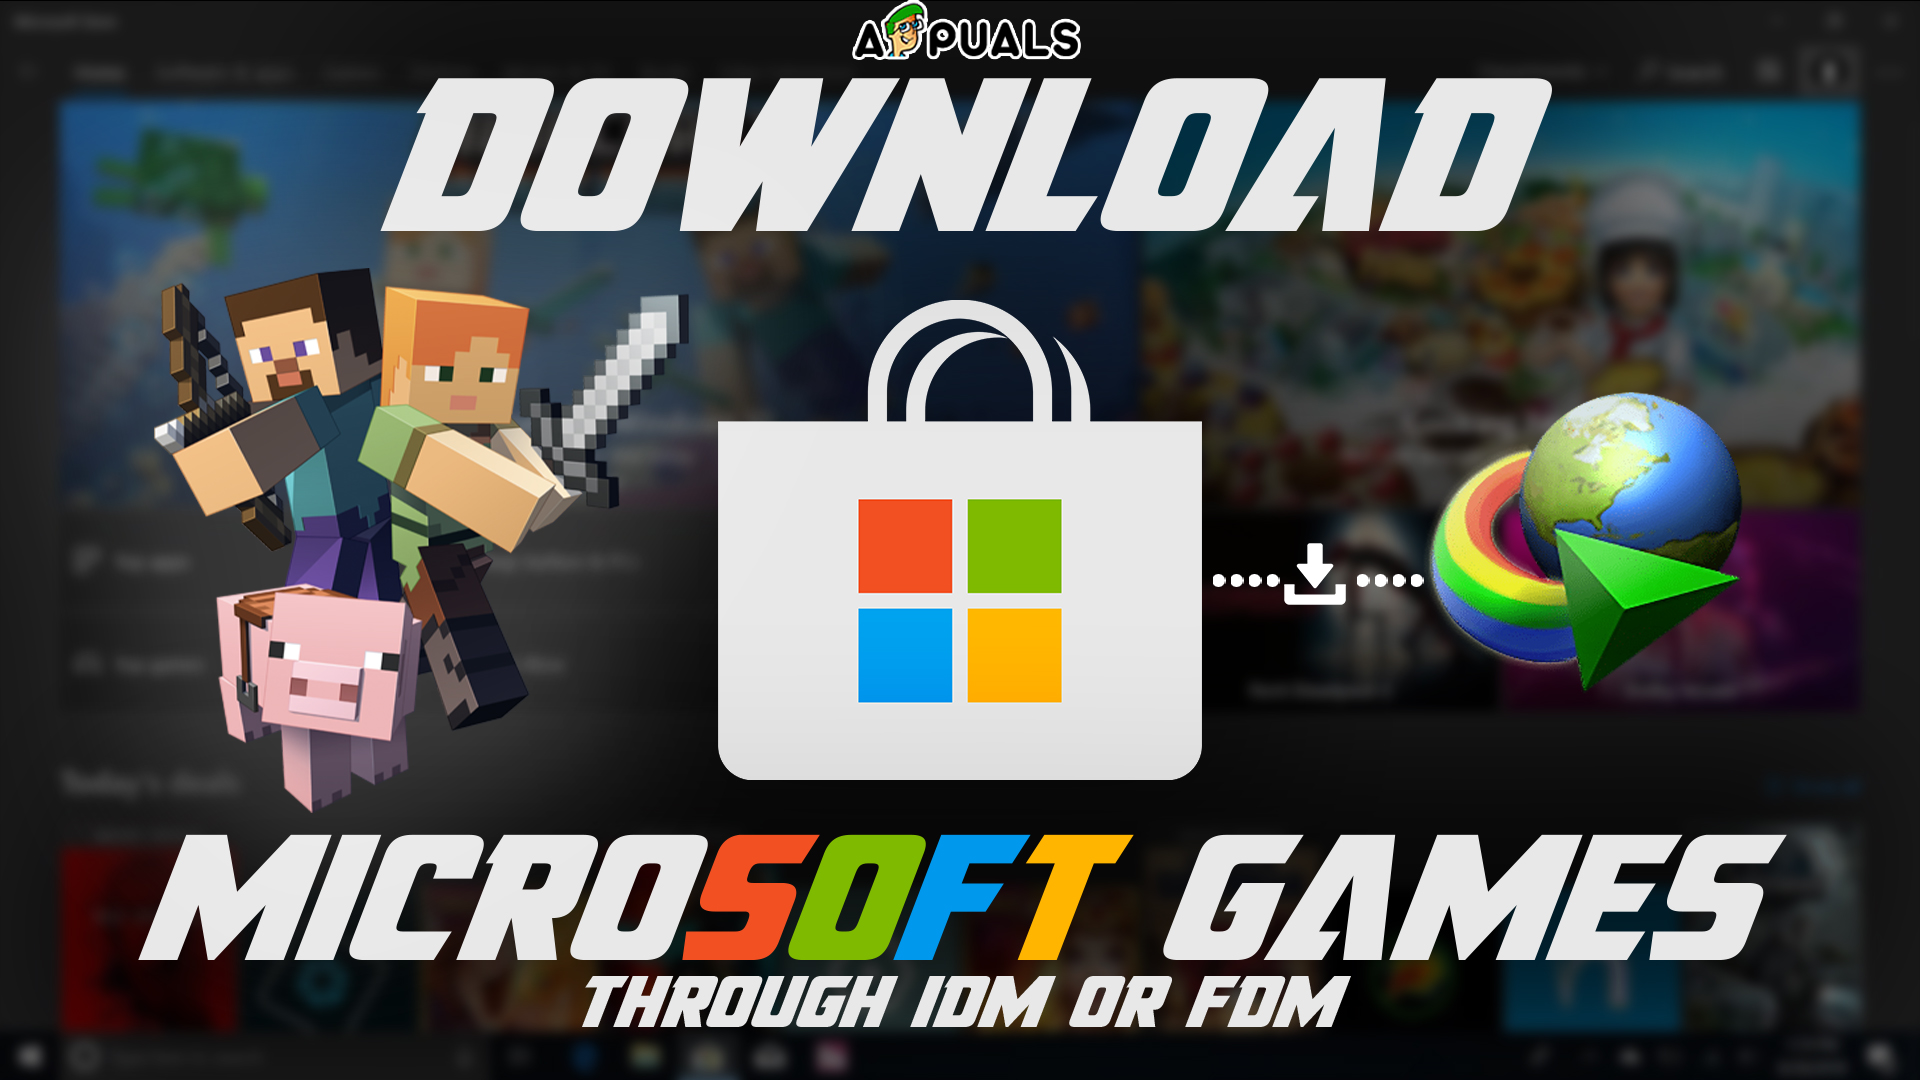 How to download microsoft games on pc free word search games to download